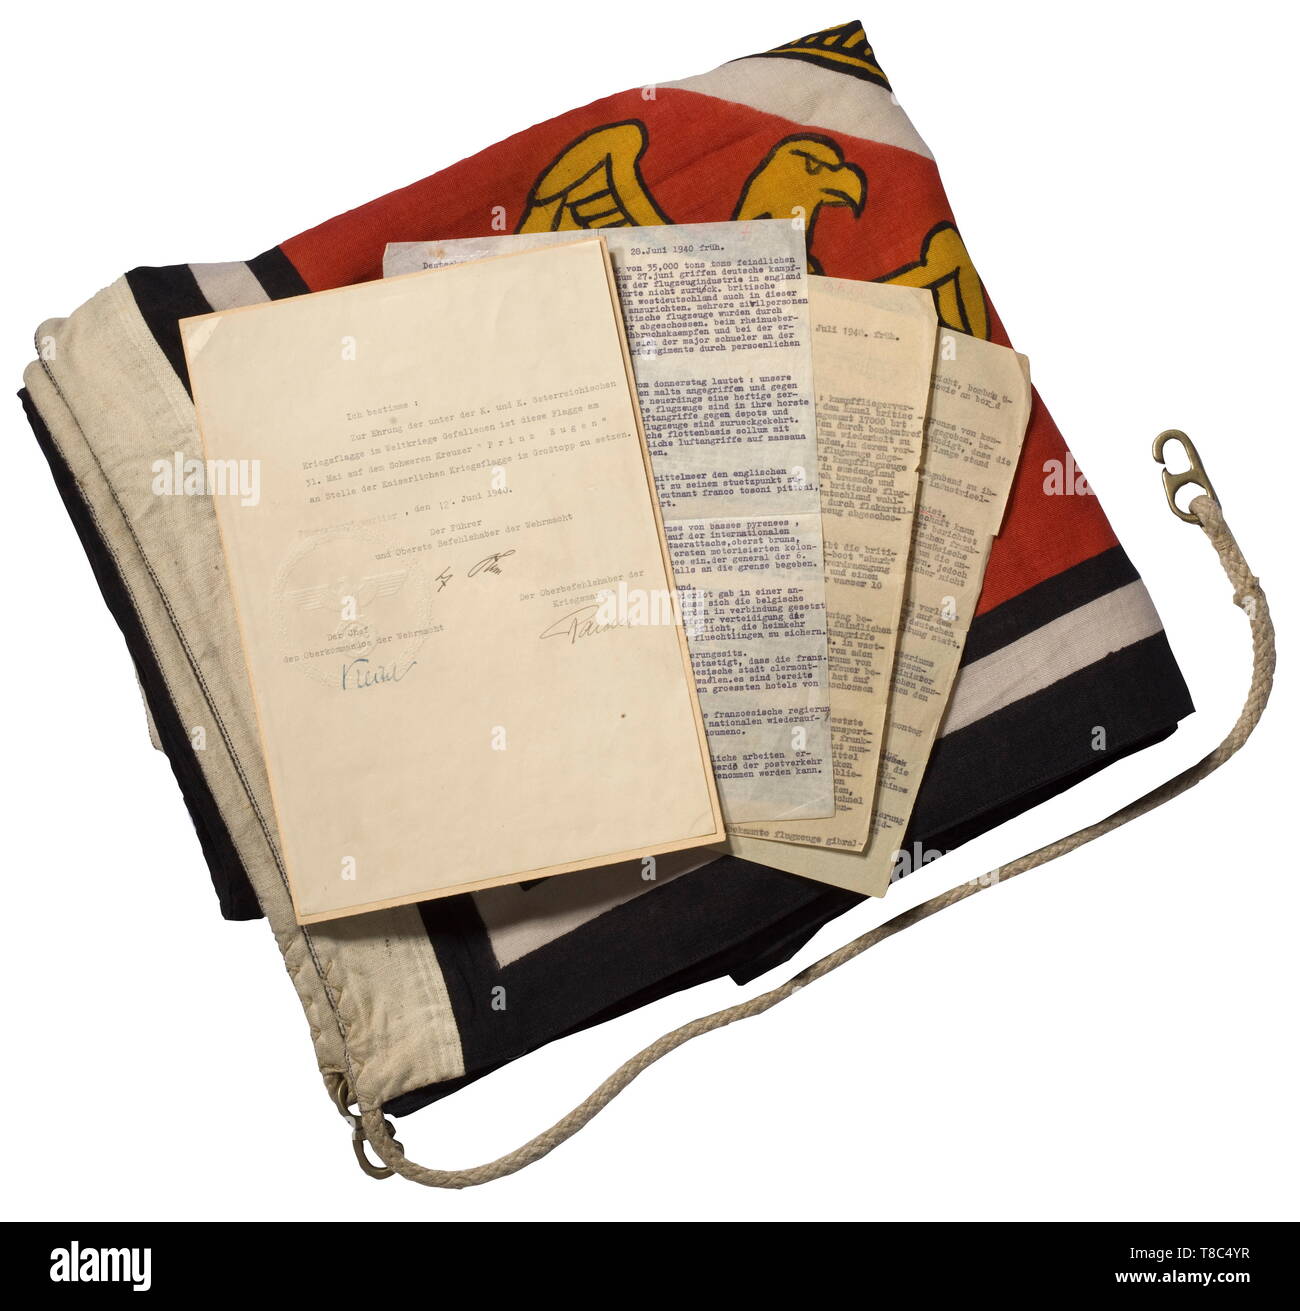 A Führer standard from the heavy cruiser 'Prinz Eugen' Colour-imprinted naval flag cloth, the left side lettered 'Stand. d. Führ. 1,5 x 1,5' with naval acceptance stamp. Colour-fresh, slightly stained, small moth traces. Included is the flag display decree for the 'Prinz Eugen' for the future memorial days of the Battle of Jutland (tr) 'In honour of those who were killed in action in the World War under the imperial and royal Austrian war flag, on 31 May this flag is set on the main topmast instead of the imperial war flag aboard the heavy cruiser 'Prinz Eugen´. Führer H 20, Editorial-Use-Only Stock Photo